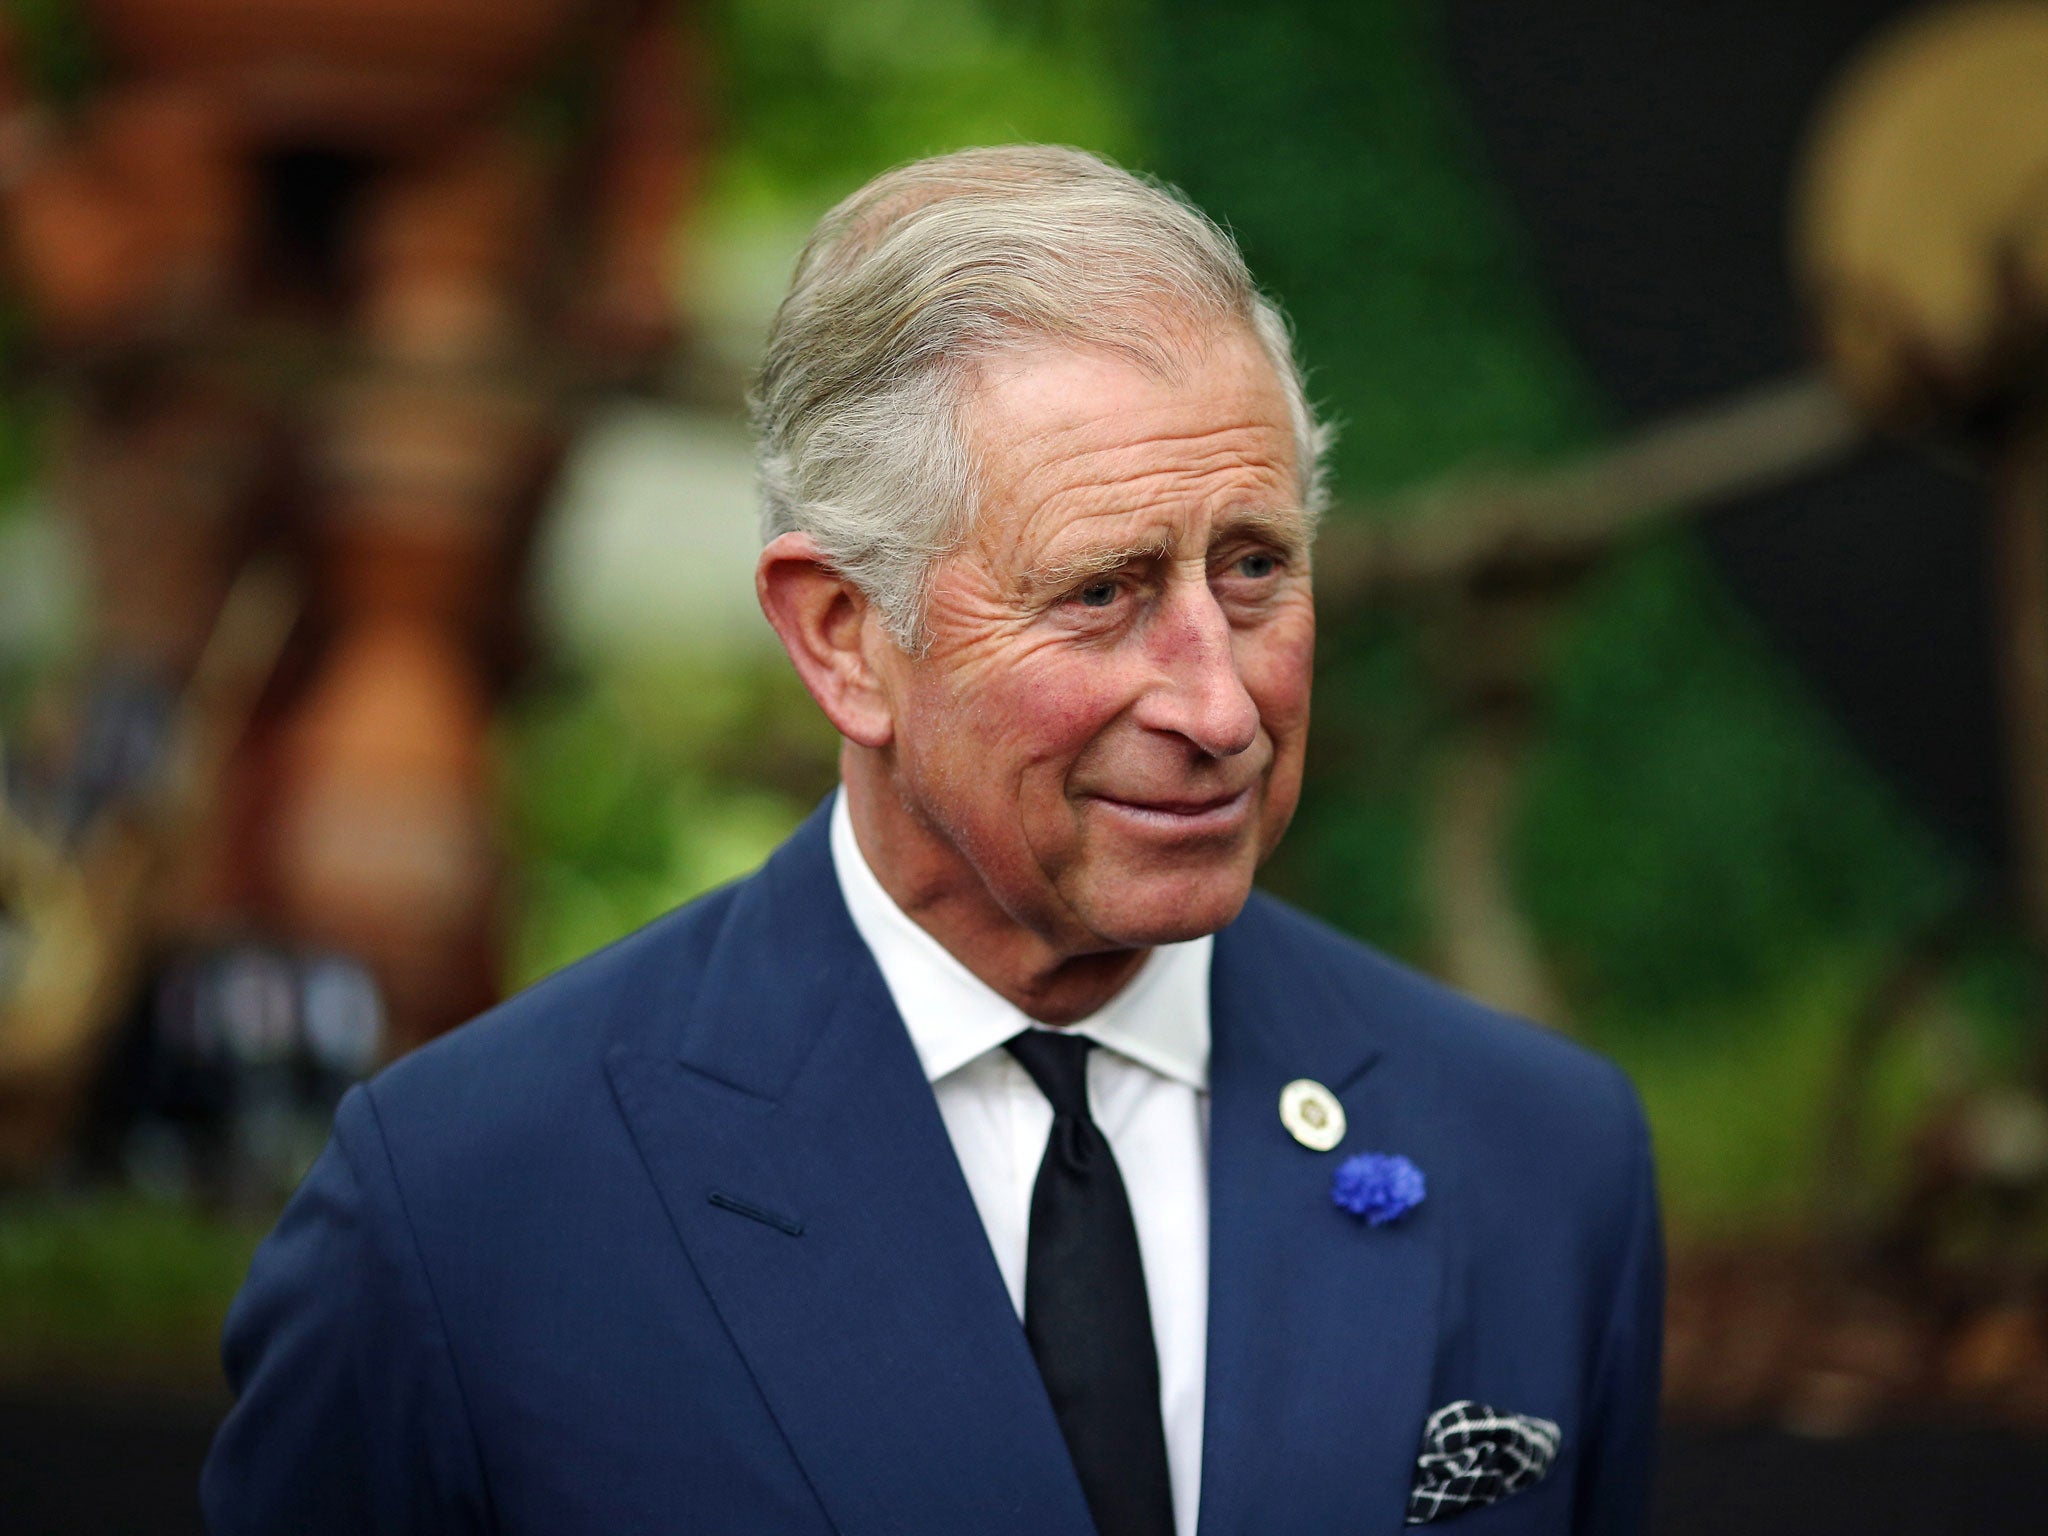 Prince Charles's Duchy of Cornwall estate generates £28m in revenue every year